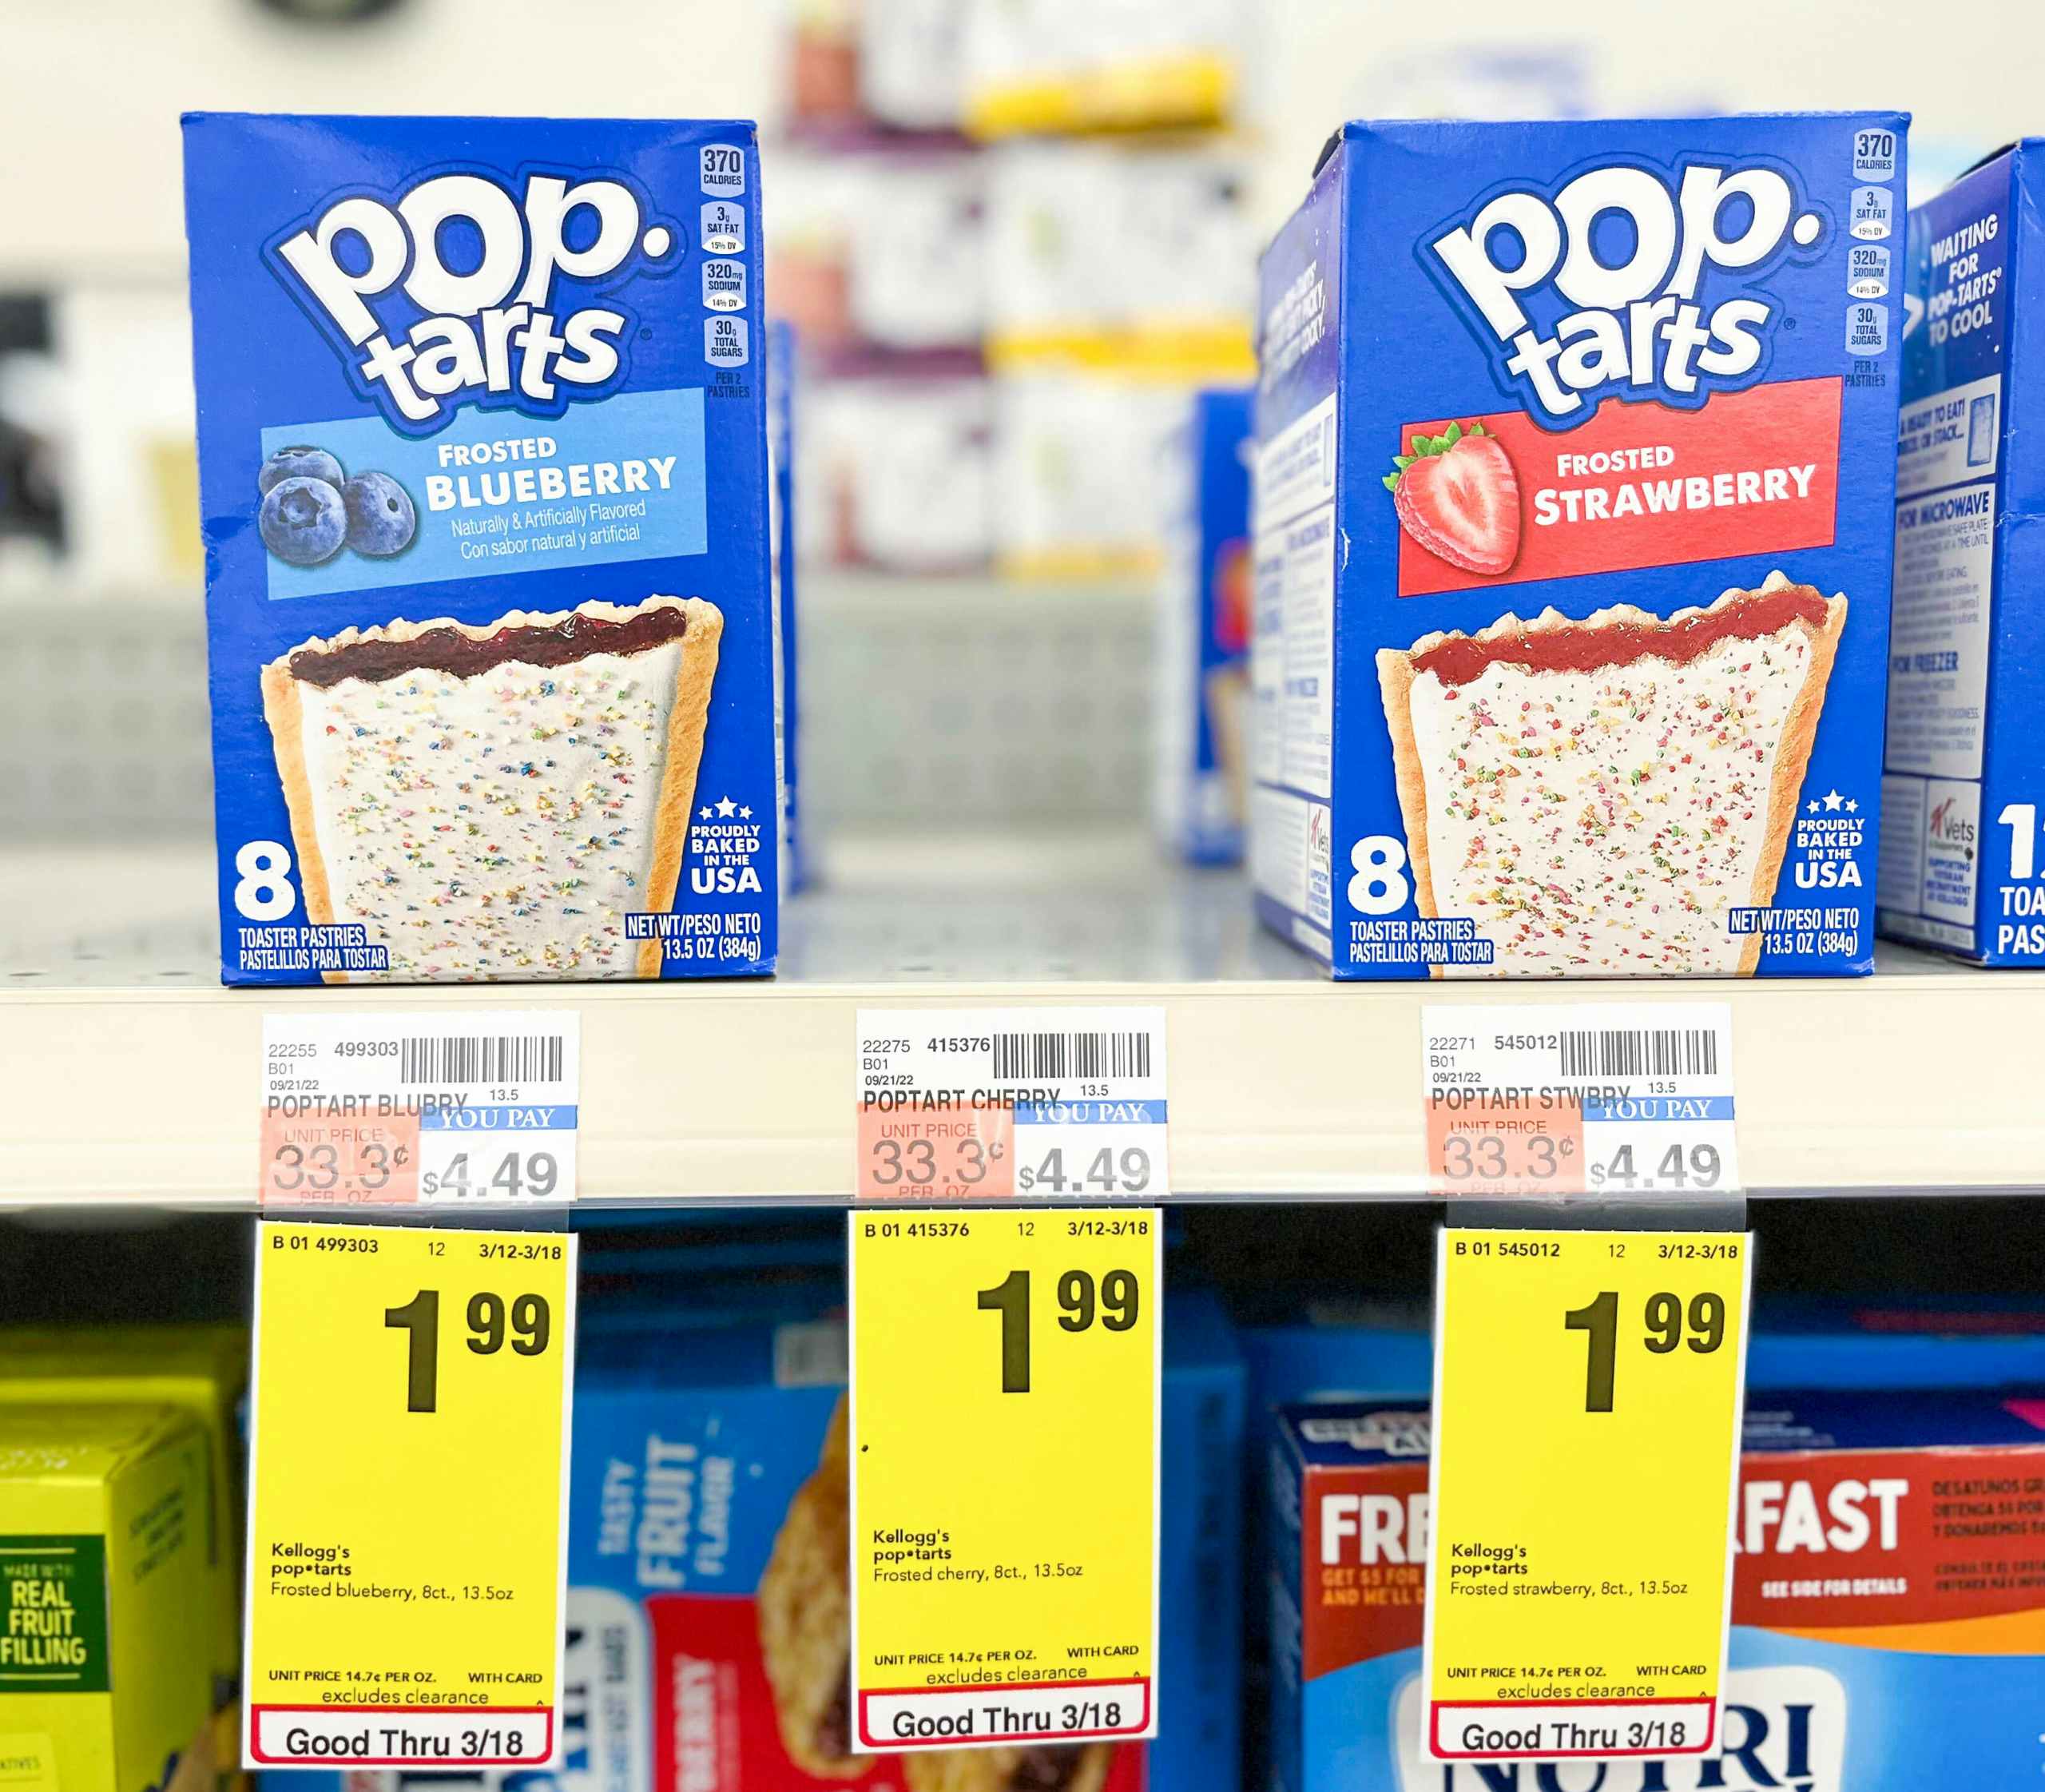 box of frosted blueberry and strawberry pop-tarts on shelf with sales tag underneath